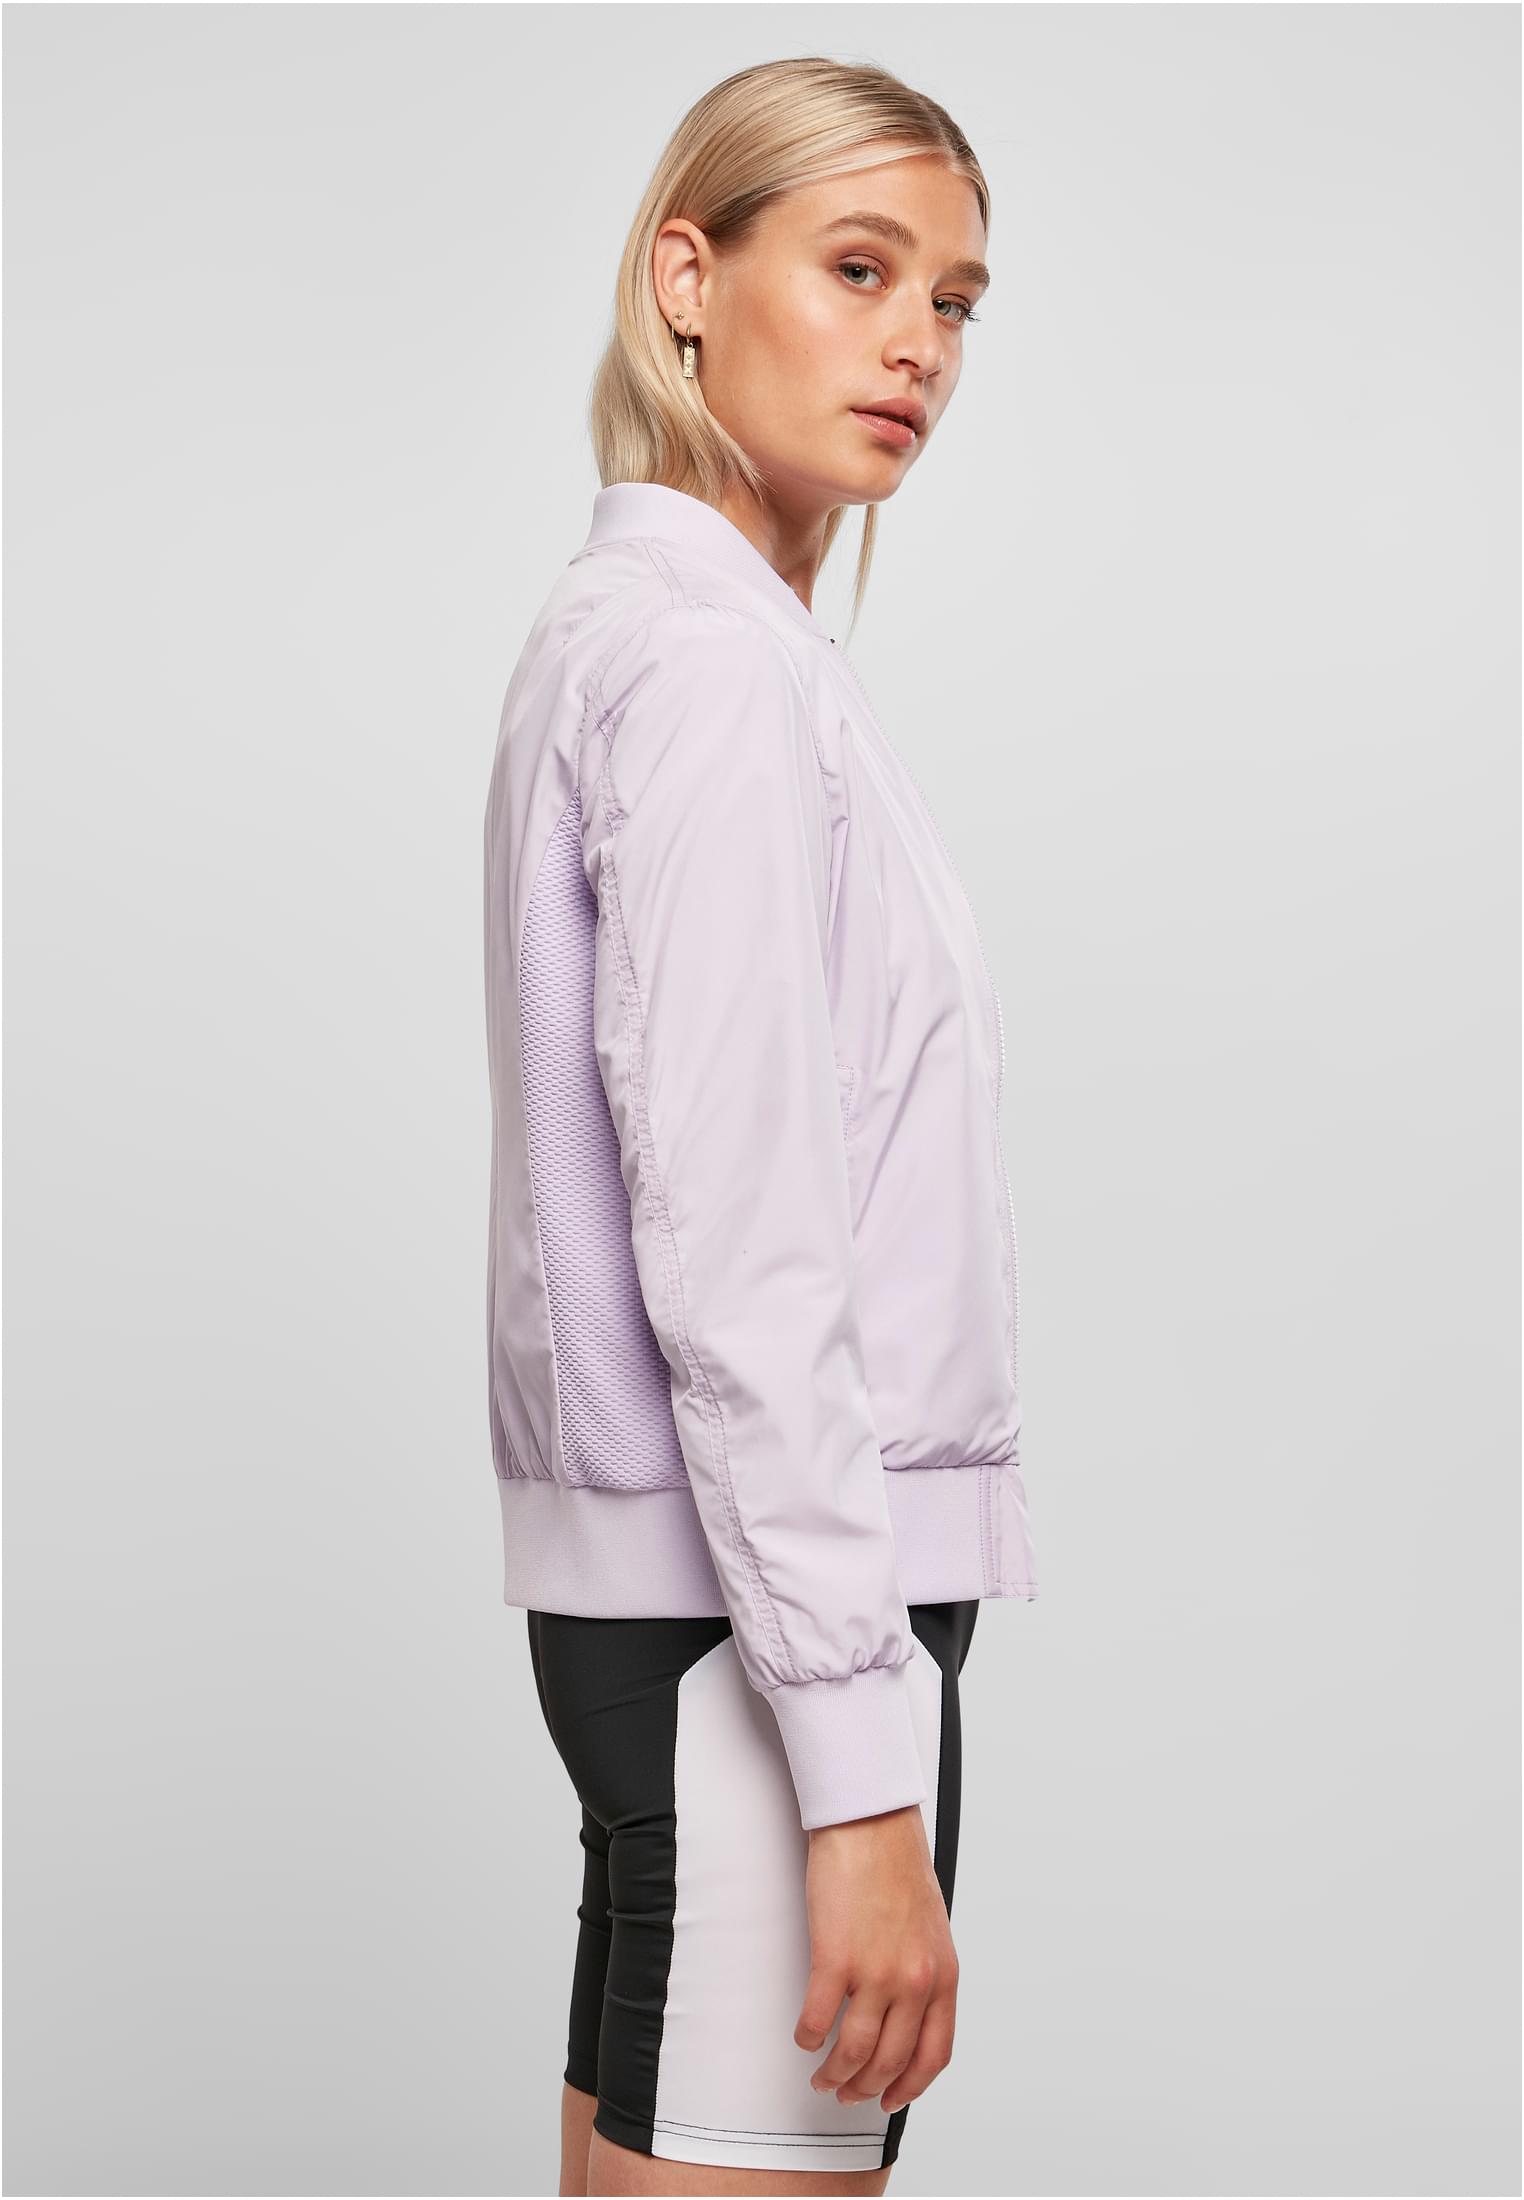 Frauen Ladies Light Bomber Jacket in Farbe lilac